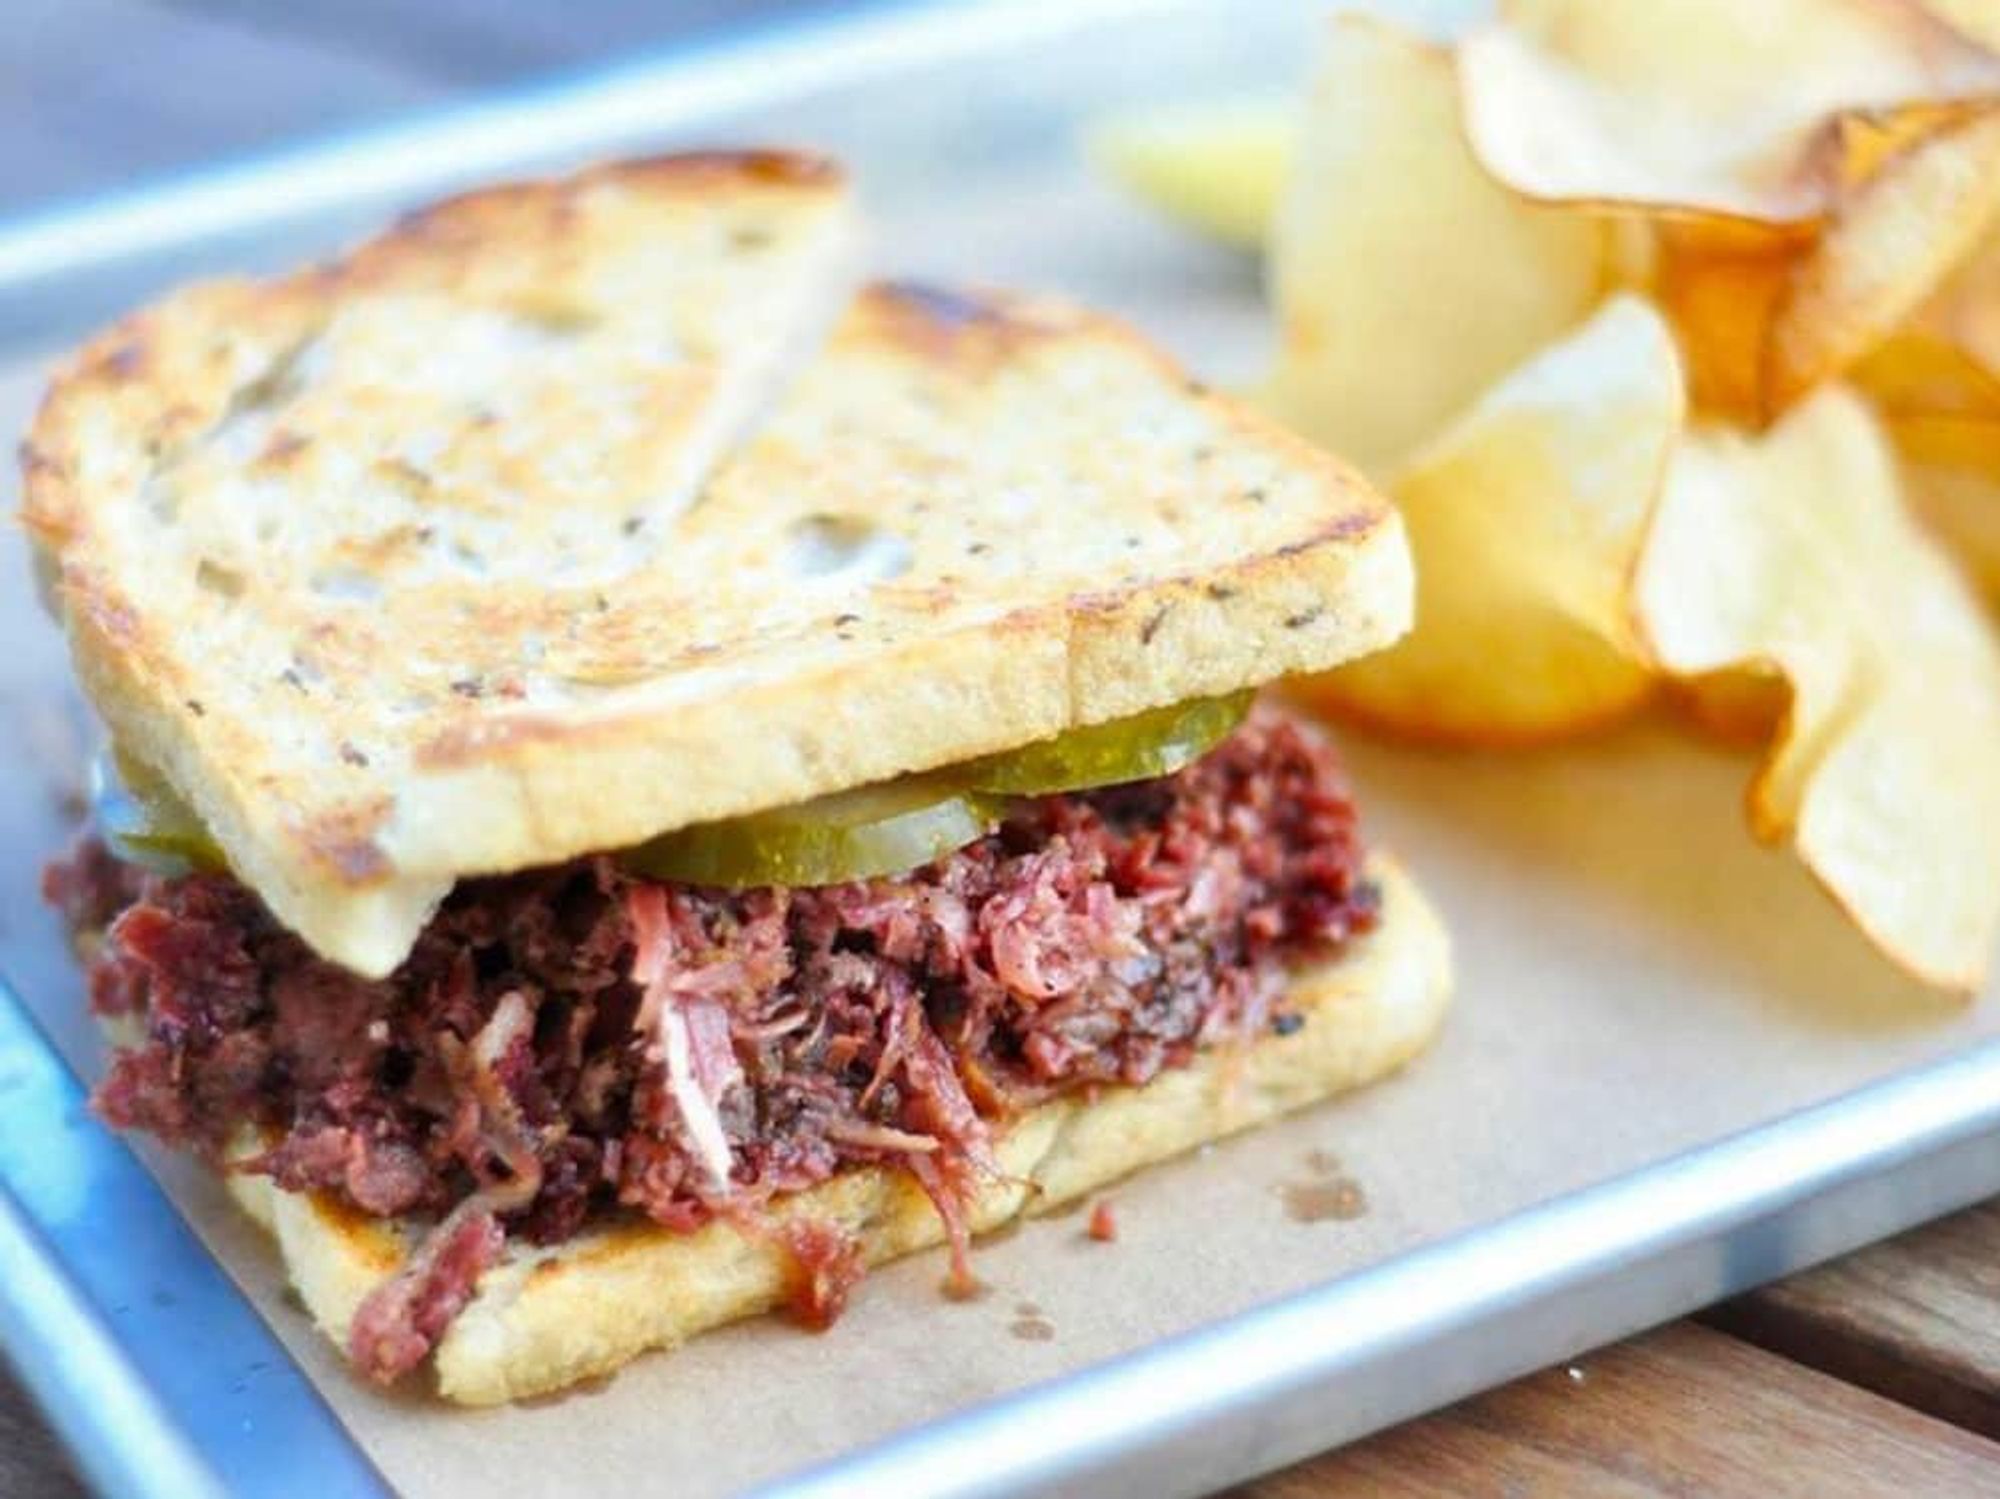 Story of Texas Cafe pastrami sandwich